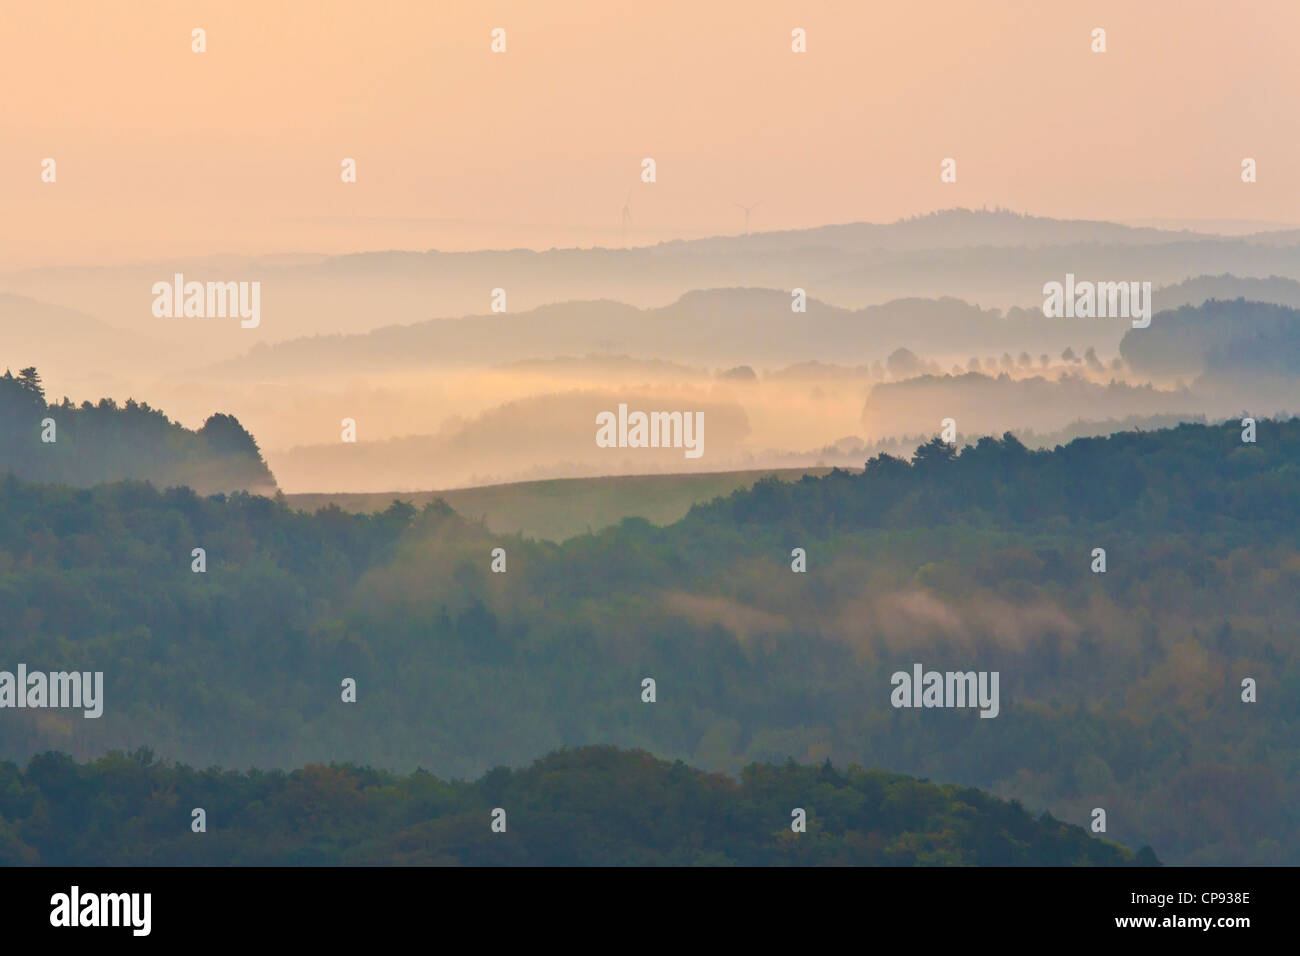 Germany, Thuringia, Eisenach, View of Thuringian Forest at dawn Stock Photo